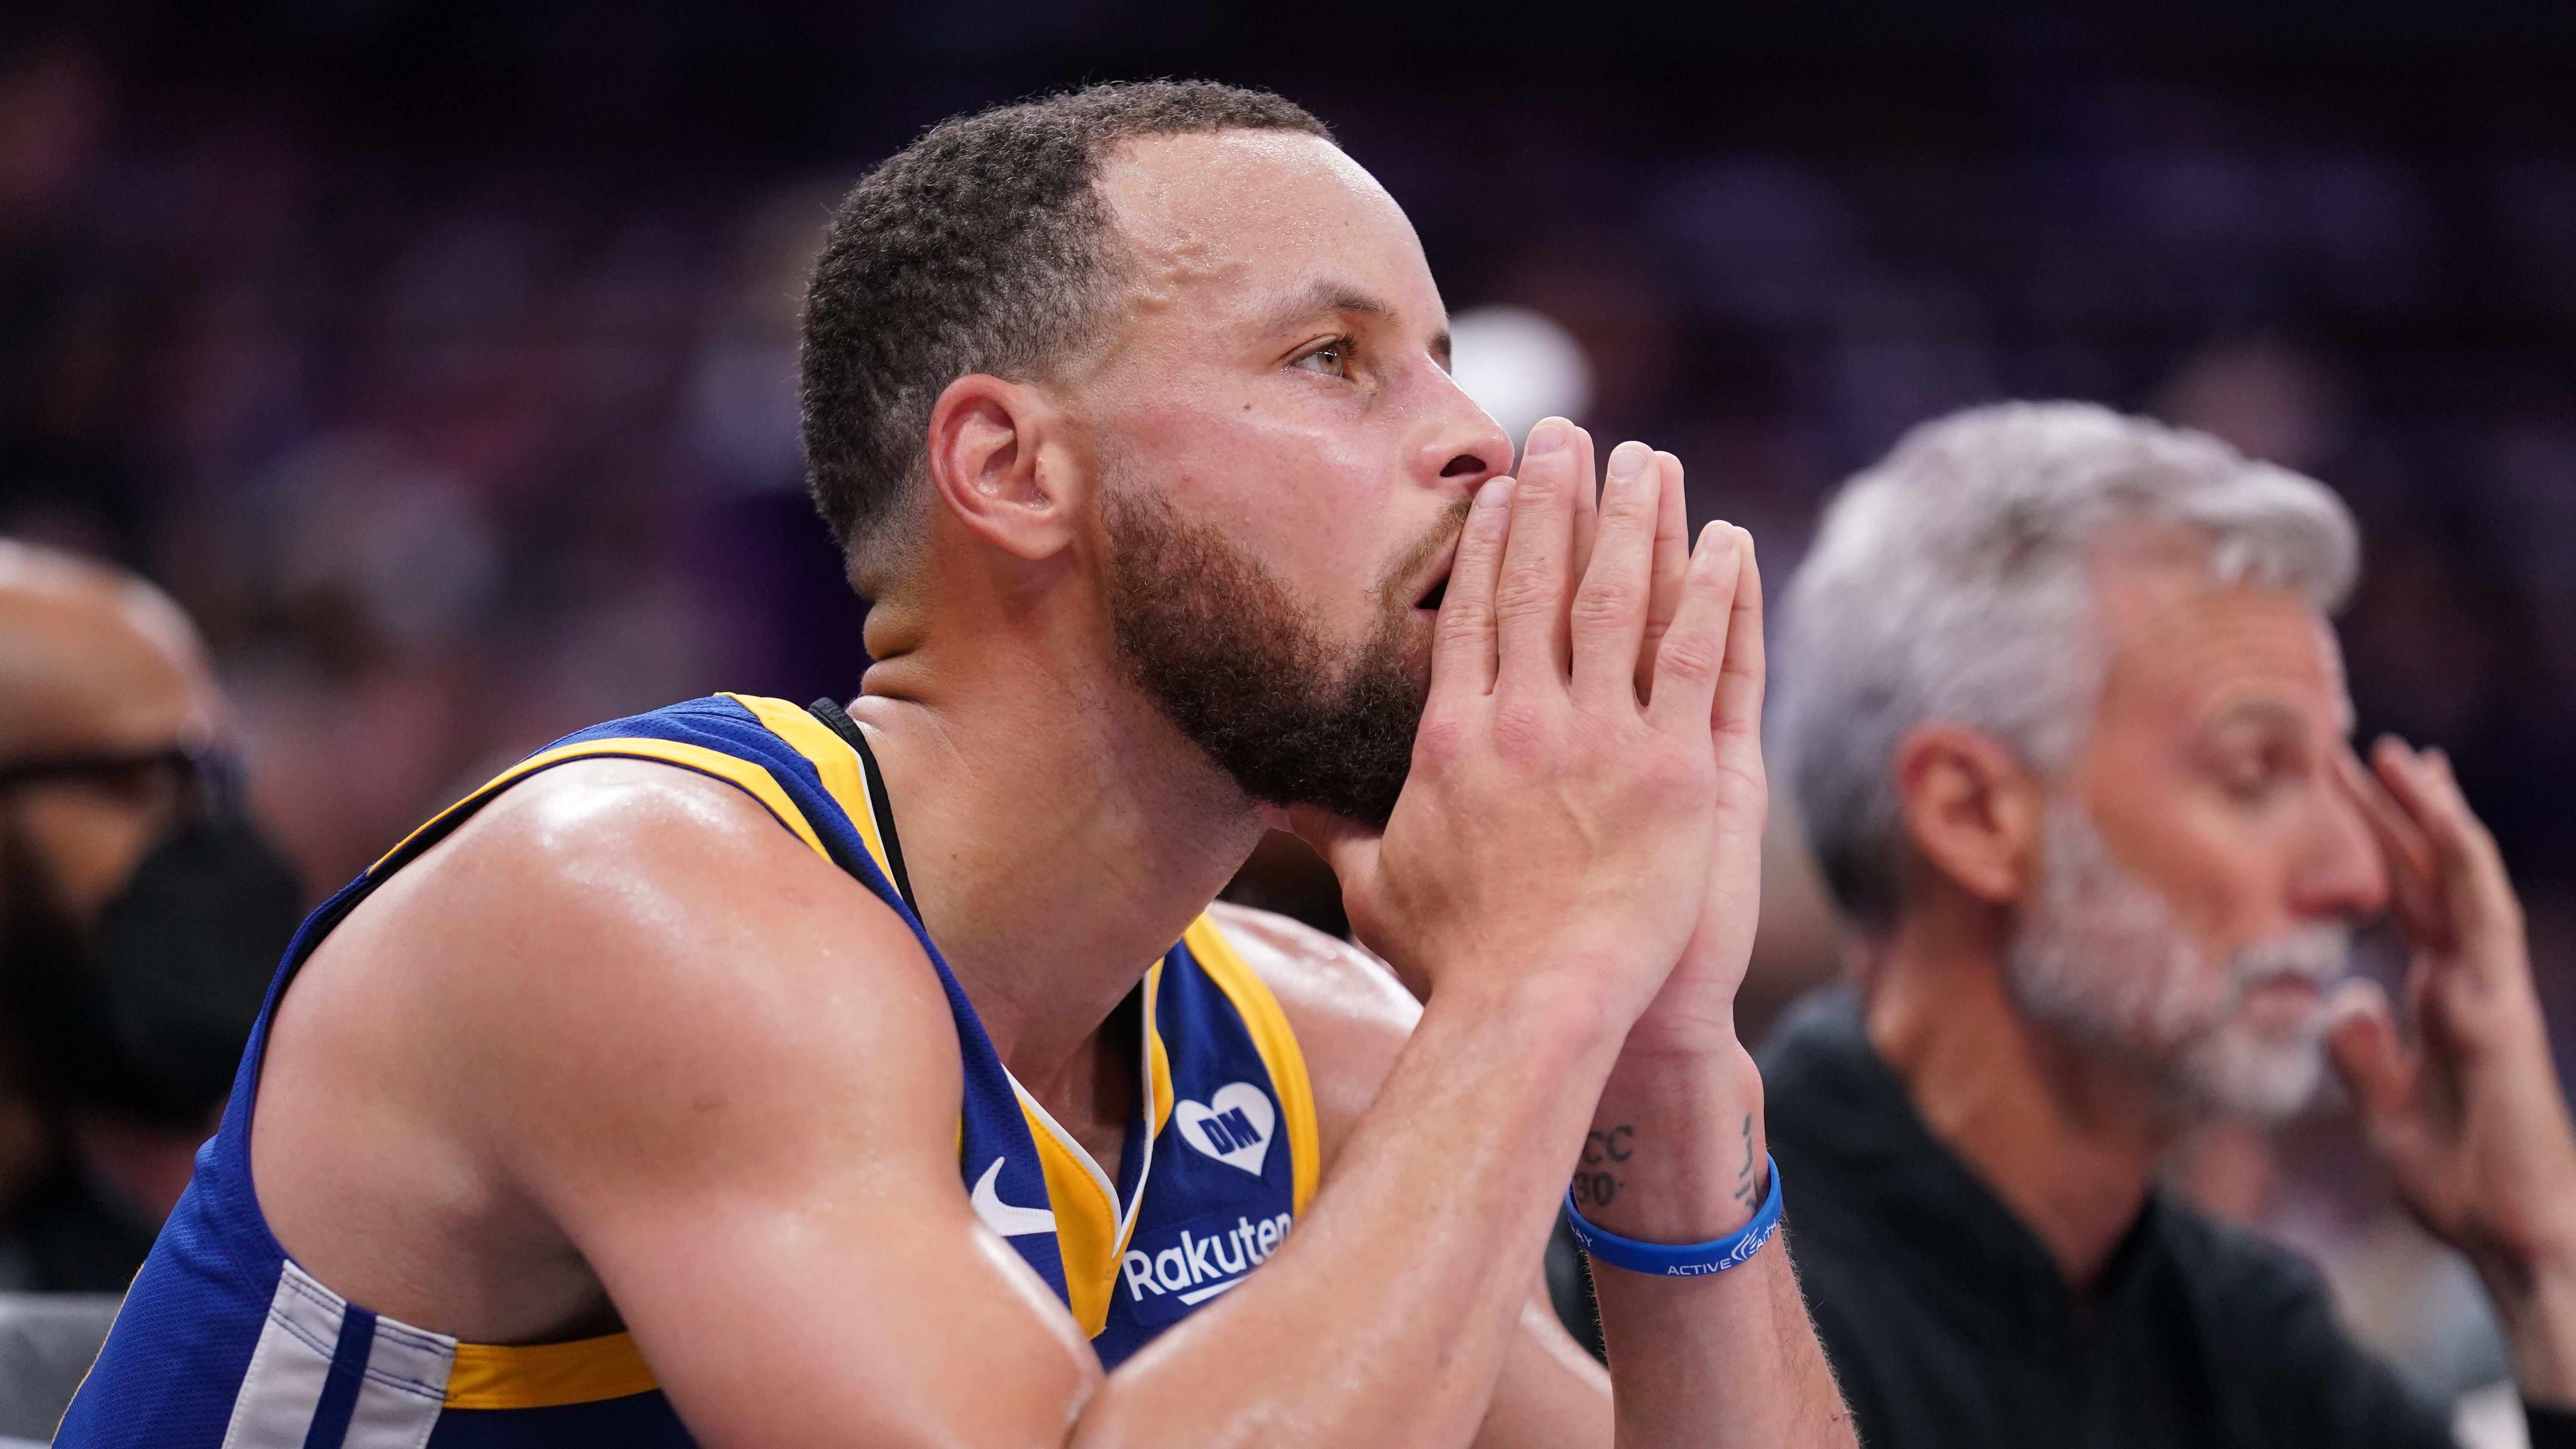 Steph Curry's Emotional Message About Klay Thompson, Draymond Green After Season-Ending Loss